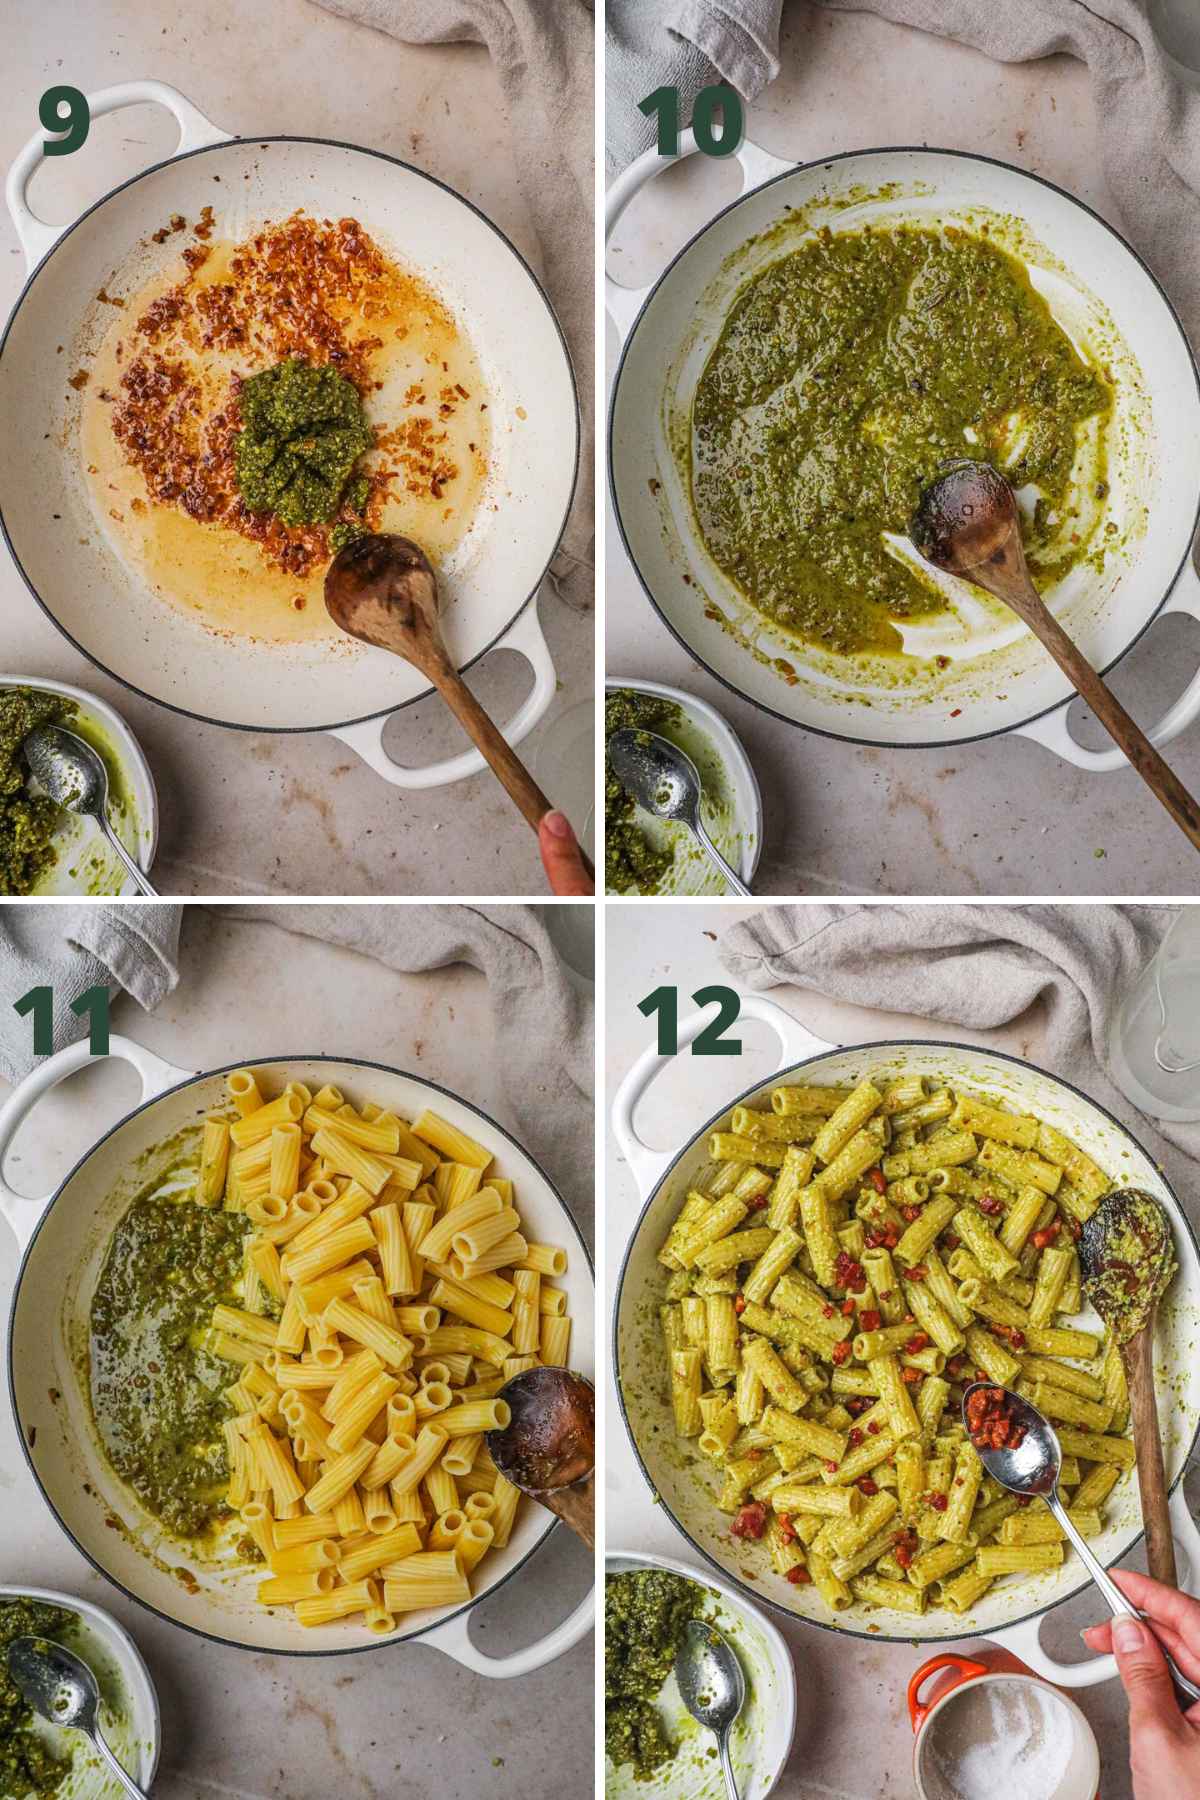 Steps to make pistachio pesto pasta, mix pistachio pesto and pasta water in pan, toss pasta until coated, fold in pancetta.